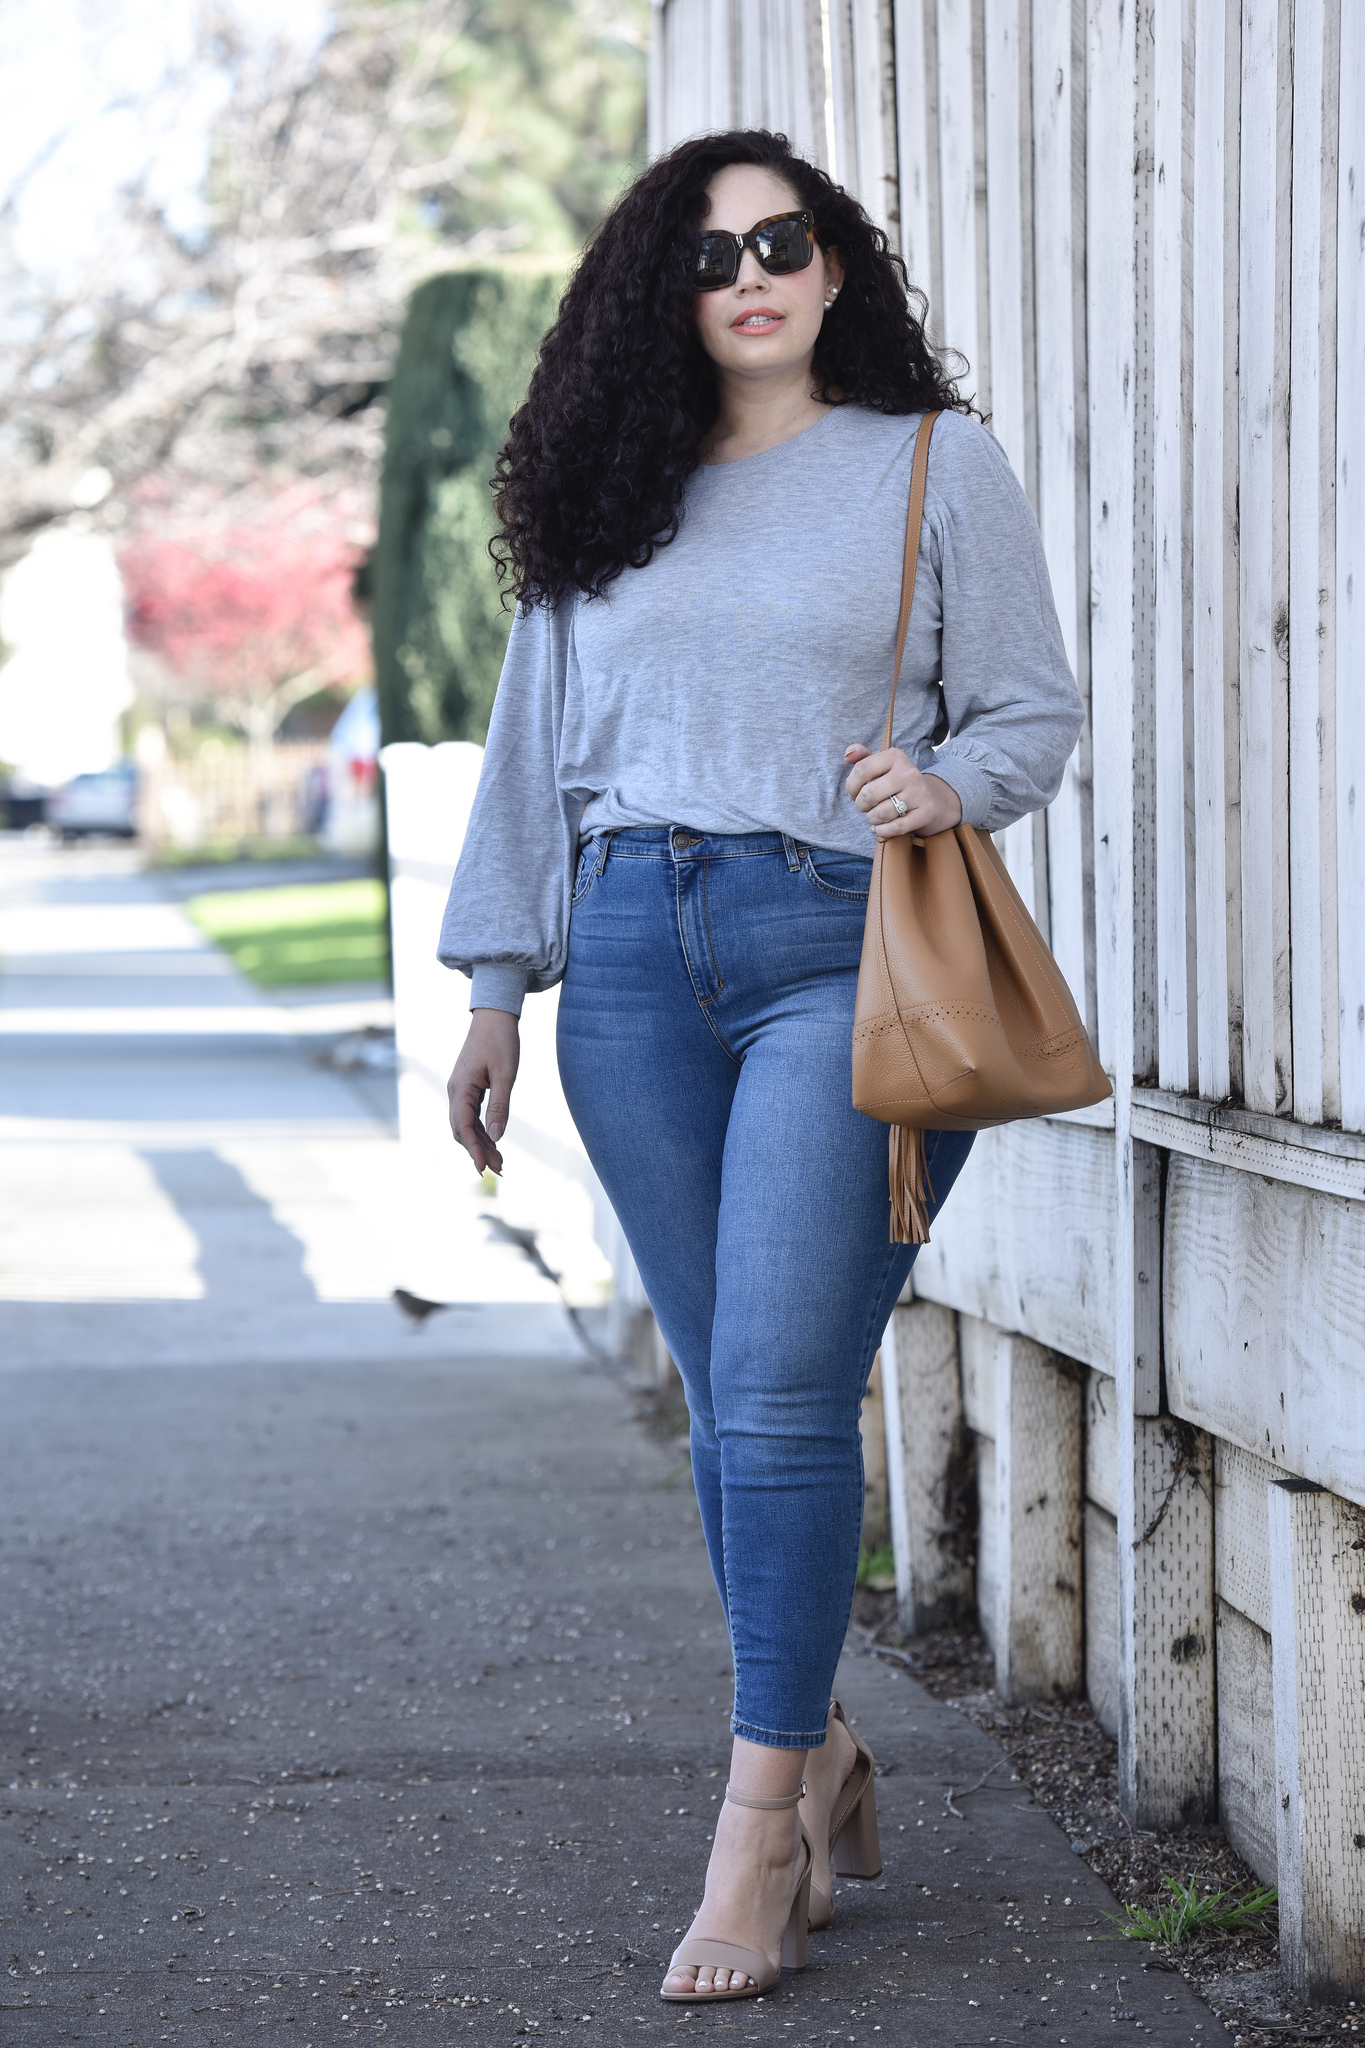 These Are The Best Jeans Under $25 via @GirlWithCurves #outfits #blogger #fashion #style #curvy #jeans